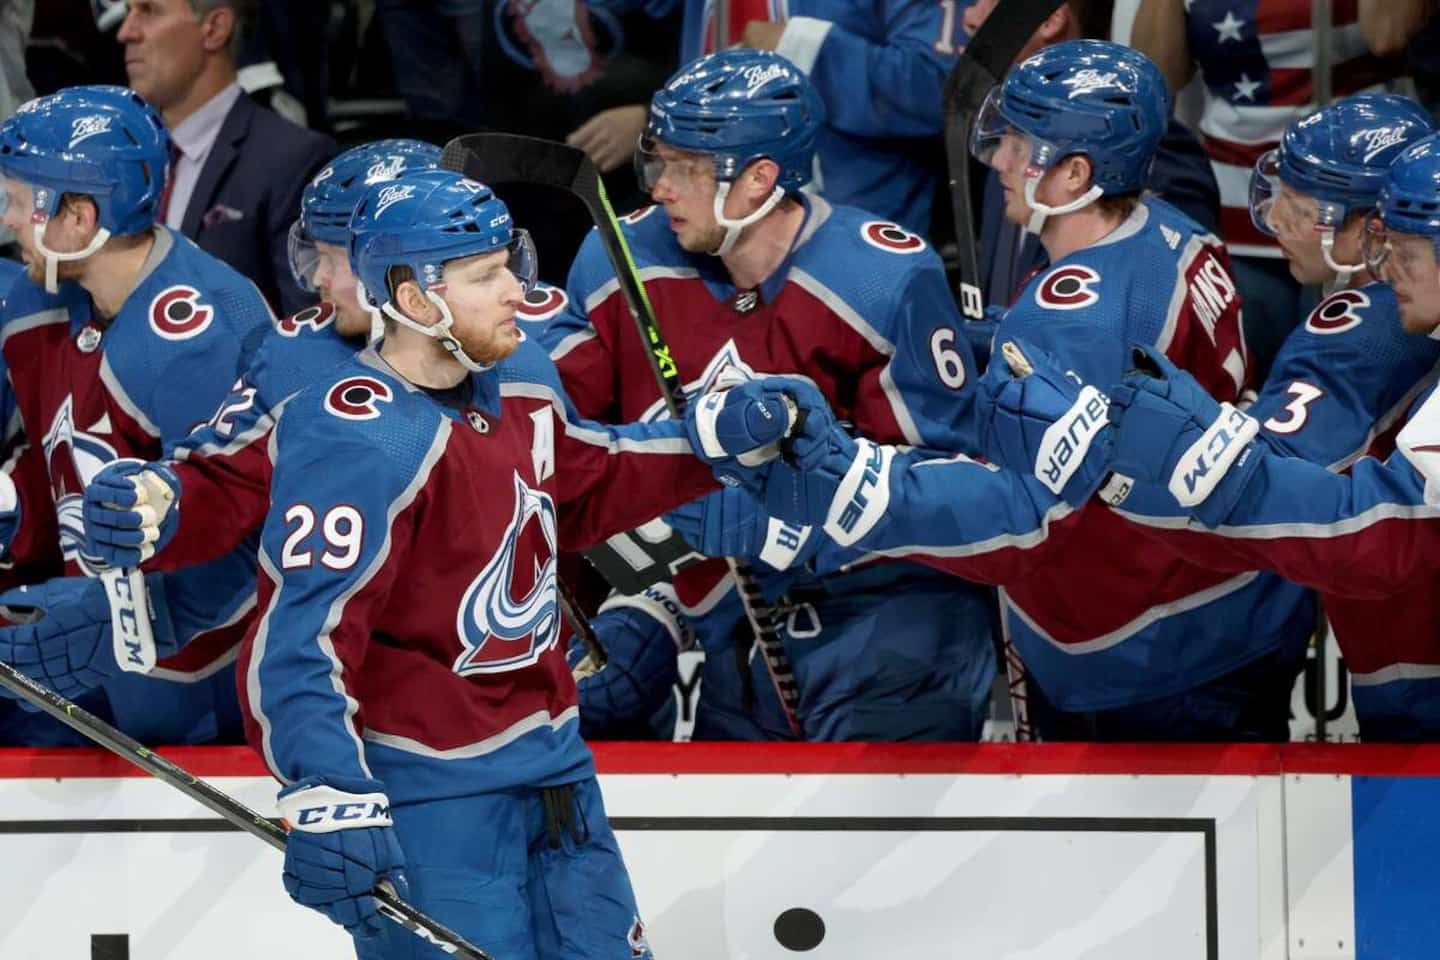 The Avalanche win a crazy game